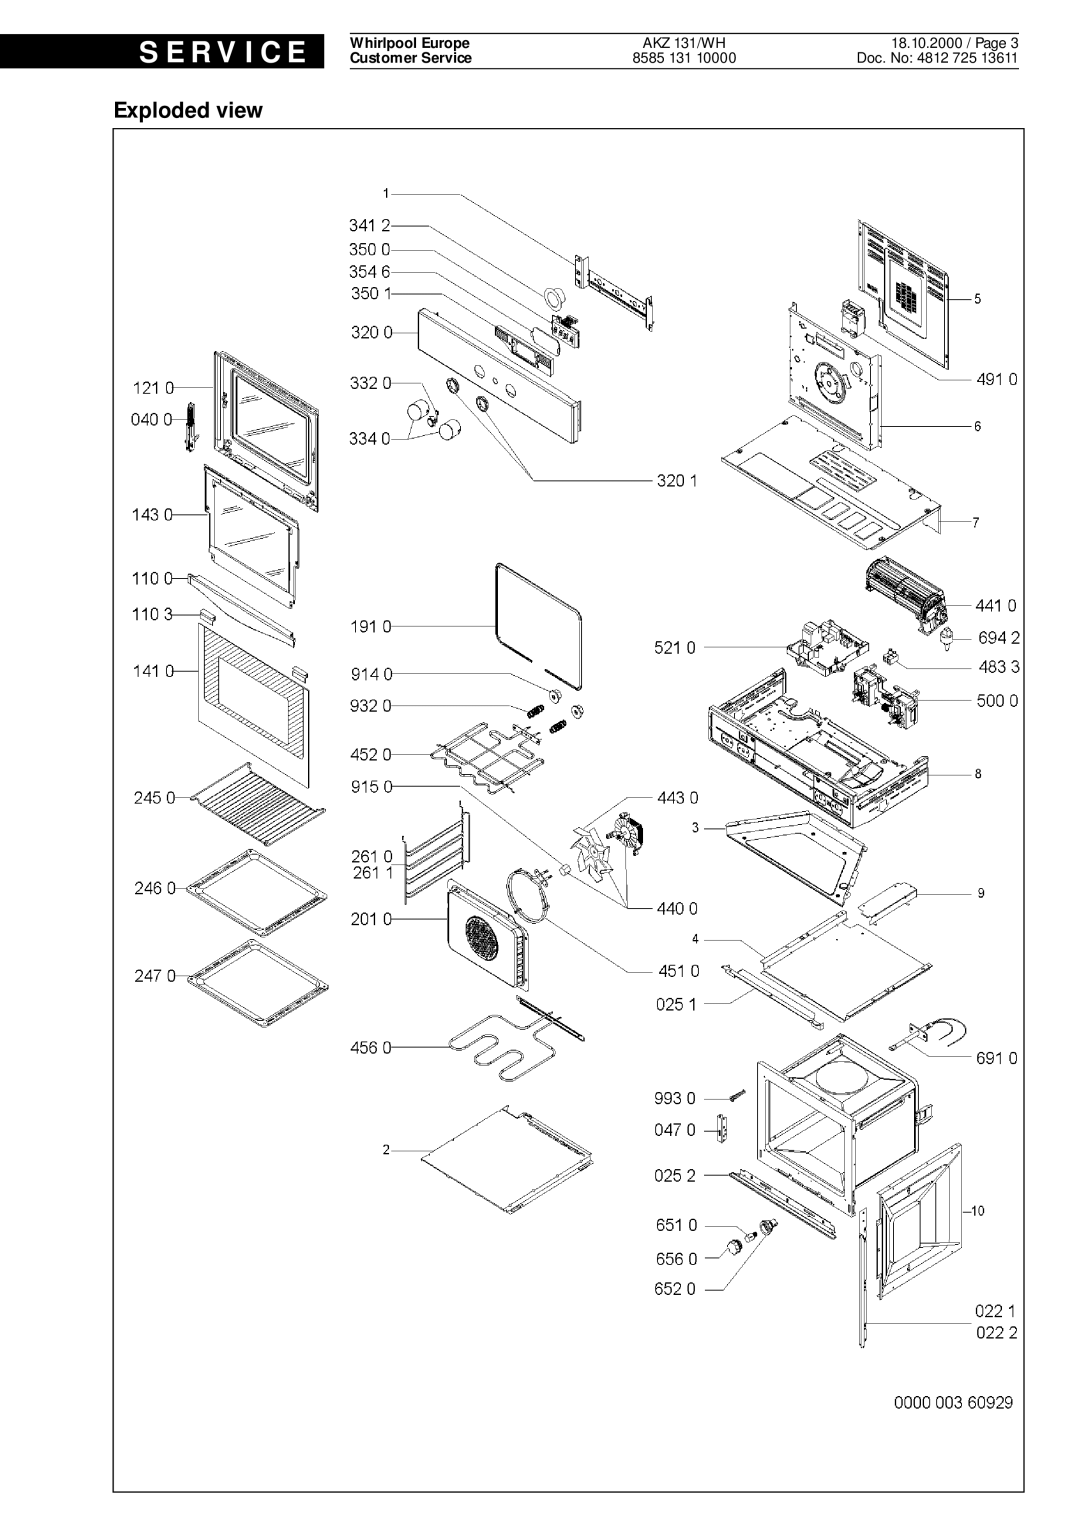 Whirlpool AKZ 131 WH Exploded view, S E R V I C E, Whirlpool Europe, 18.10.2000 / Page, Customer Service, 8585, AKZ 131/WH 